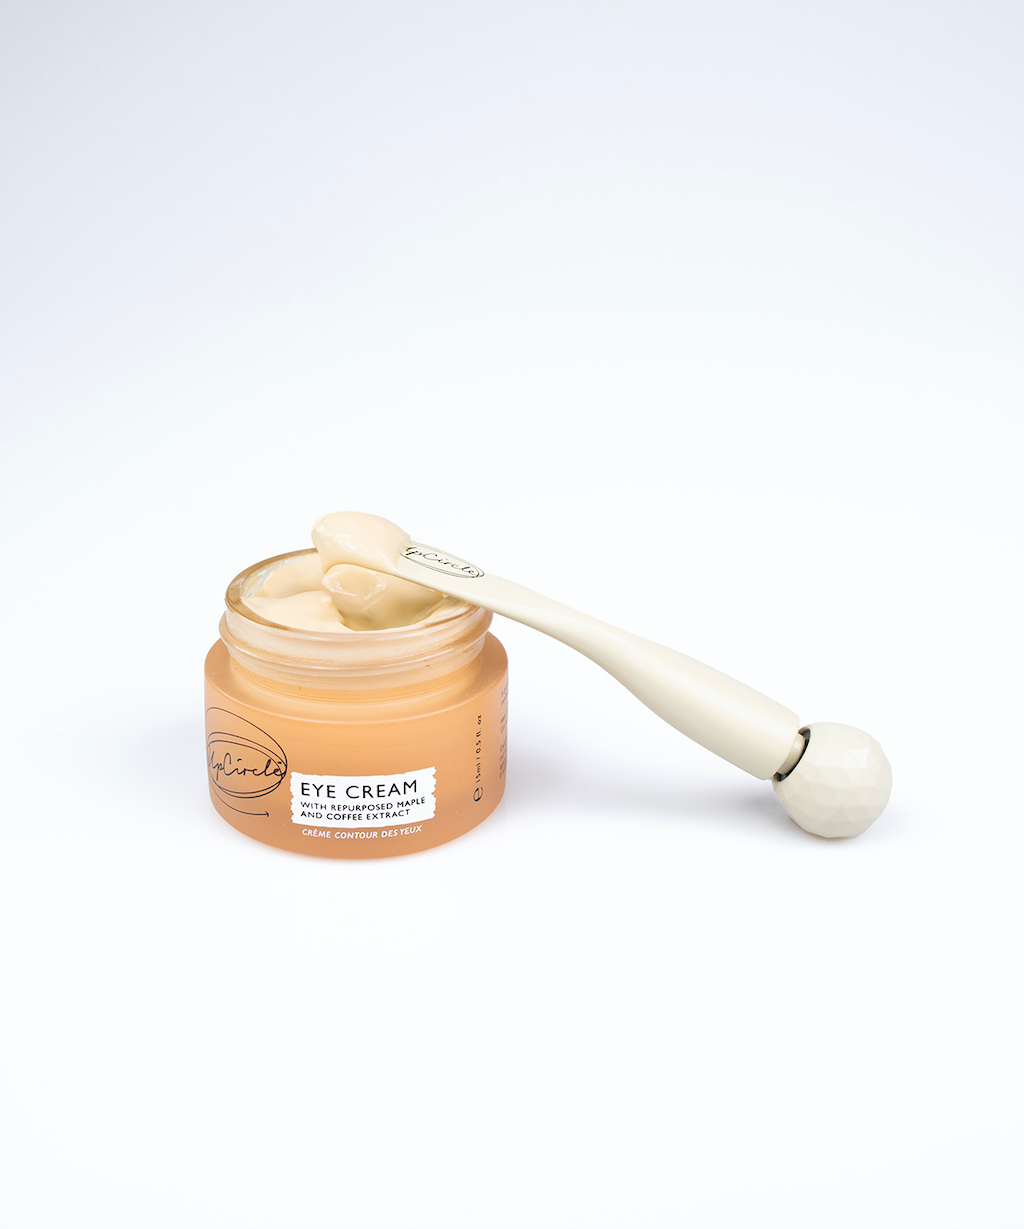 Eye roller tool for applying serums and eye creams can be seen next to a pot of upcircle eye cream which is open. the end of the eye roller is also a spatula so is shown with some of the mocha coloured cream on it. the cream is in an orange coloured glass pot